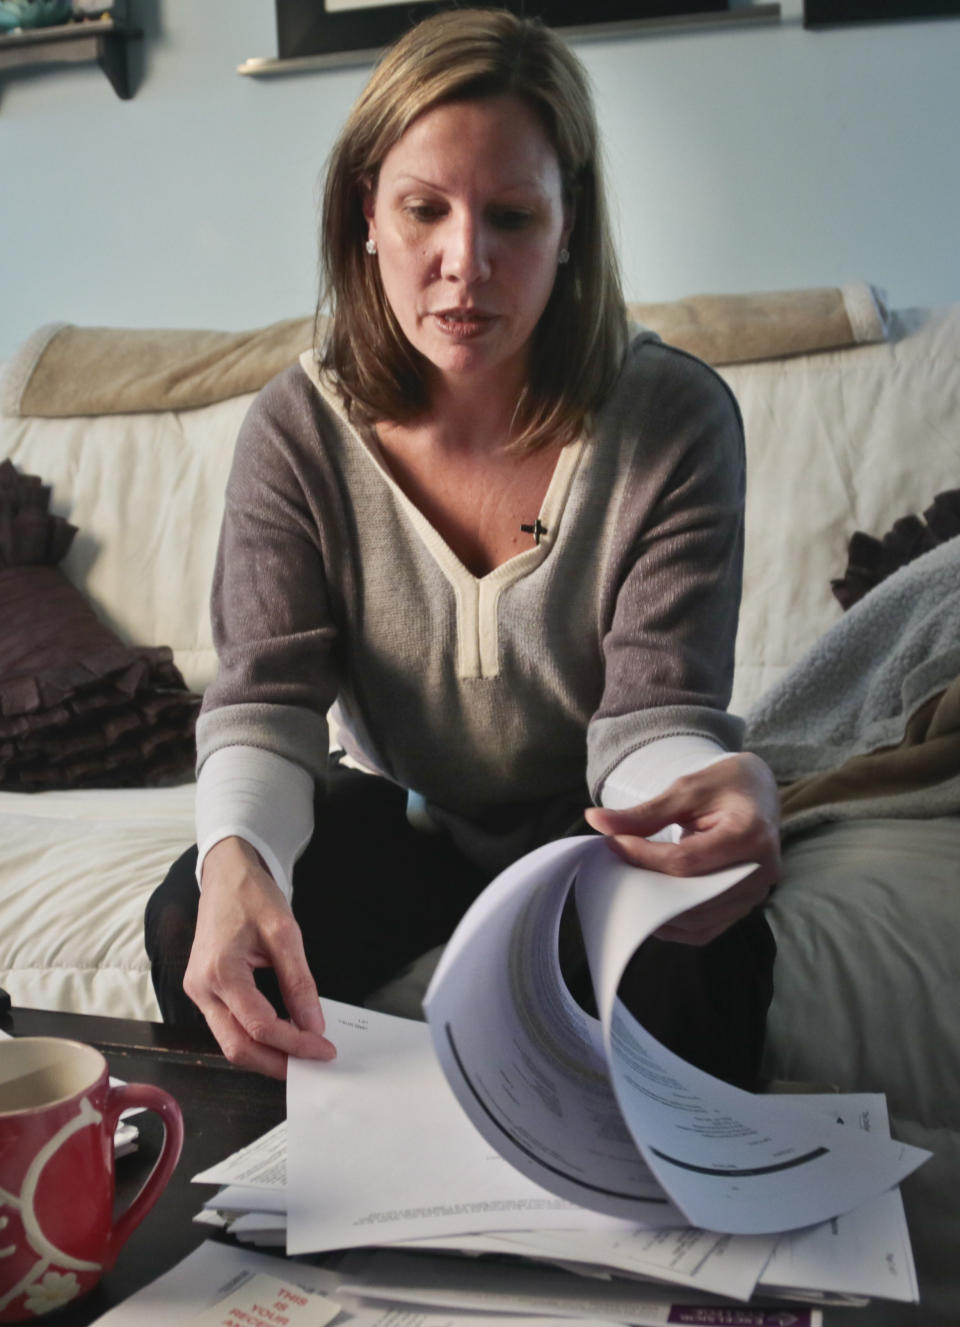 In this March 11, 2014 photo, Nora Milligan looks through a pile of legal healthcare documents at her home in Patchogue, NY. Milligan, a single mom, is fighting healthcare providers in court for denial of care to her heroin-addicted son. Having exhausted her finances for his care, she continues to live in the home she raised him even as it is being foreclosed. As the number of heroin users in the U.S. rises, more addicts are seeking help but running into barriers that block them from treatment, including lack of beds in packed facilities, high costs for care and unwillingness on the part of insurance companies to pay for inpatient rehab. (AP Photo/Bebeto Matthews)